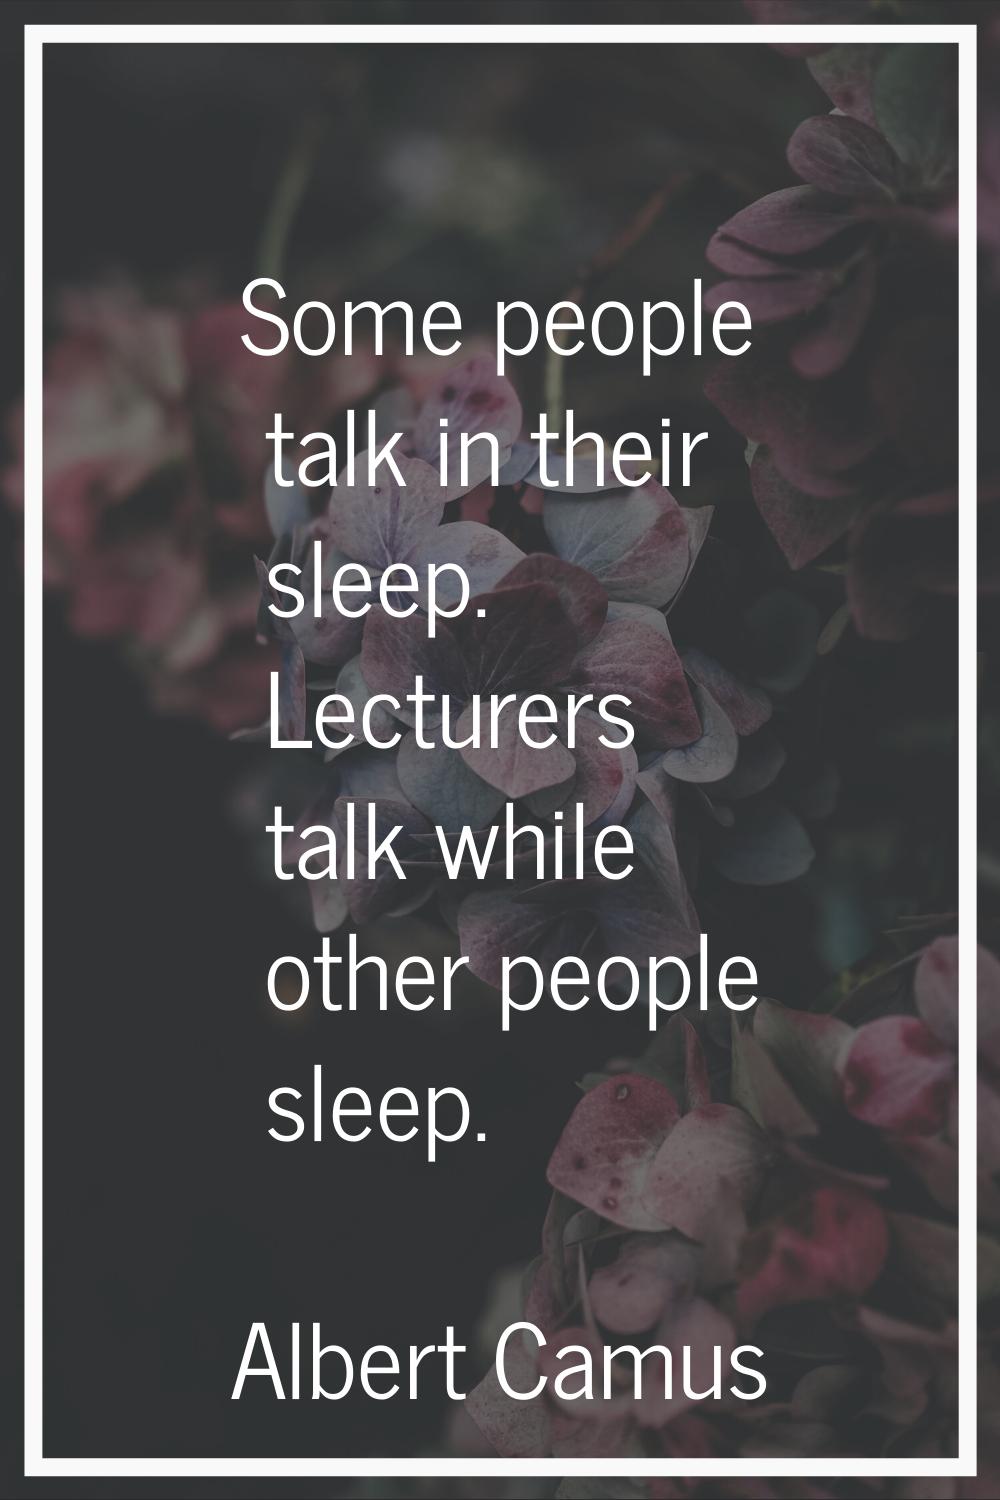 Some people talk in their sleep. Lecturers talk while other people sleep.